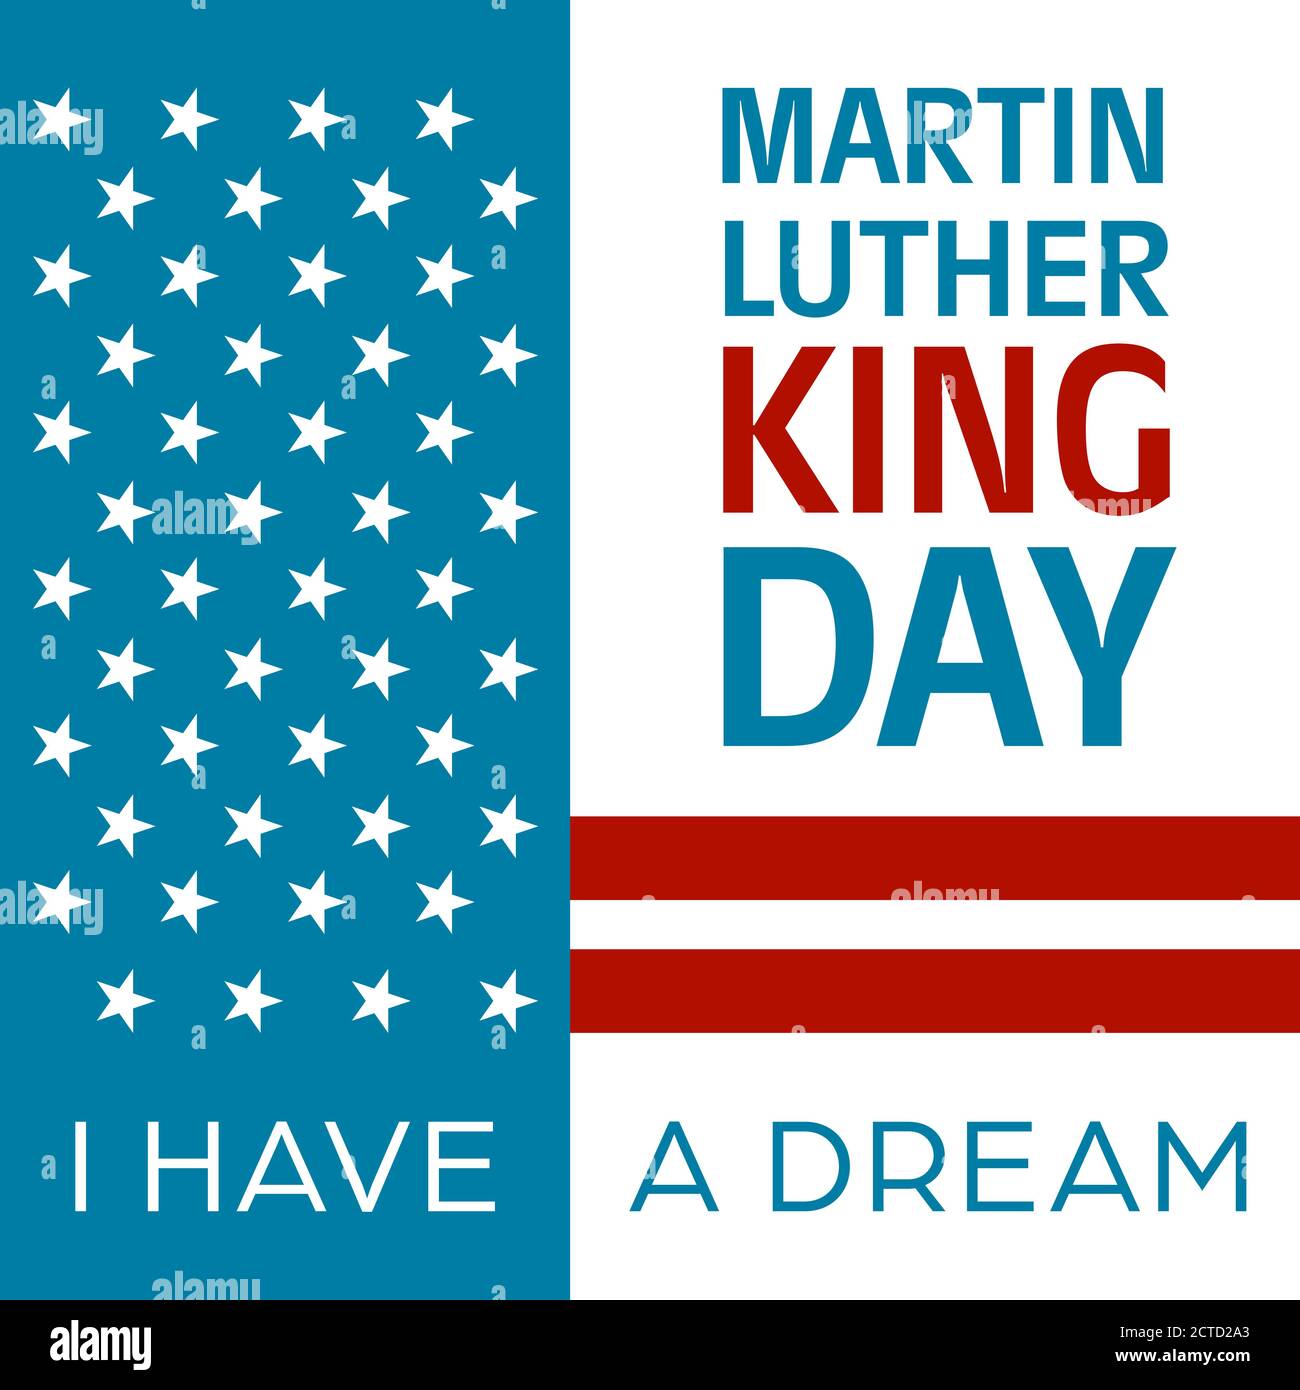 American National Holiday. US Flag with American stars, stripes and national colors. Martin Luther King Day. I have a dream. Stock Vector